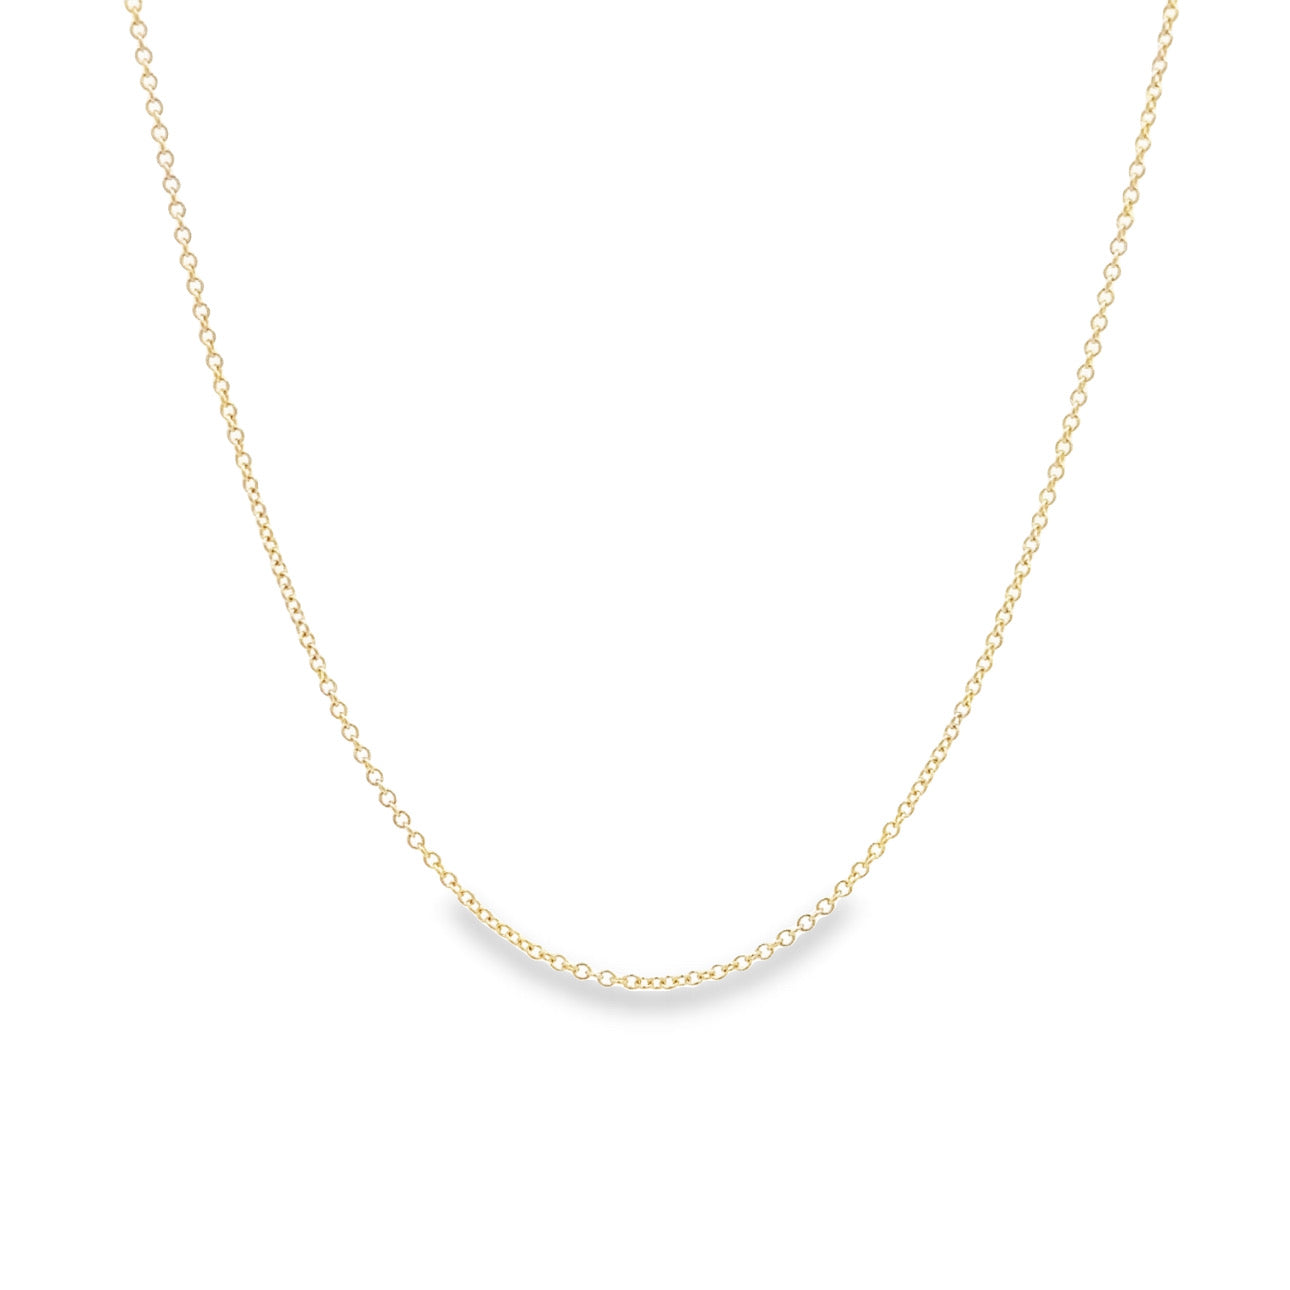 WD1213 14kt Gold Petite Rollo Link Chain